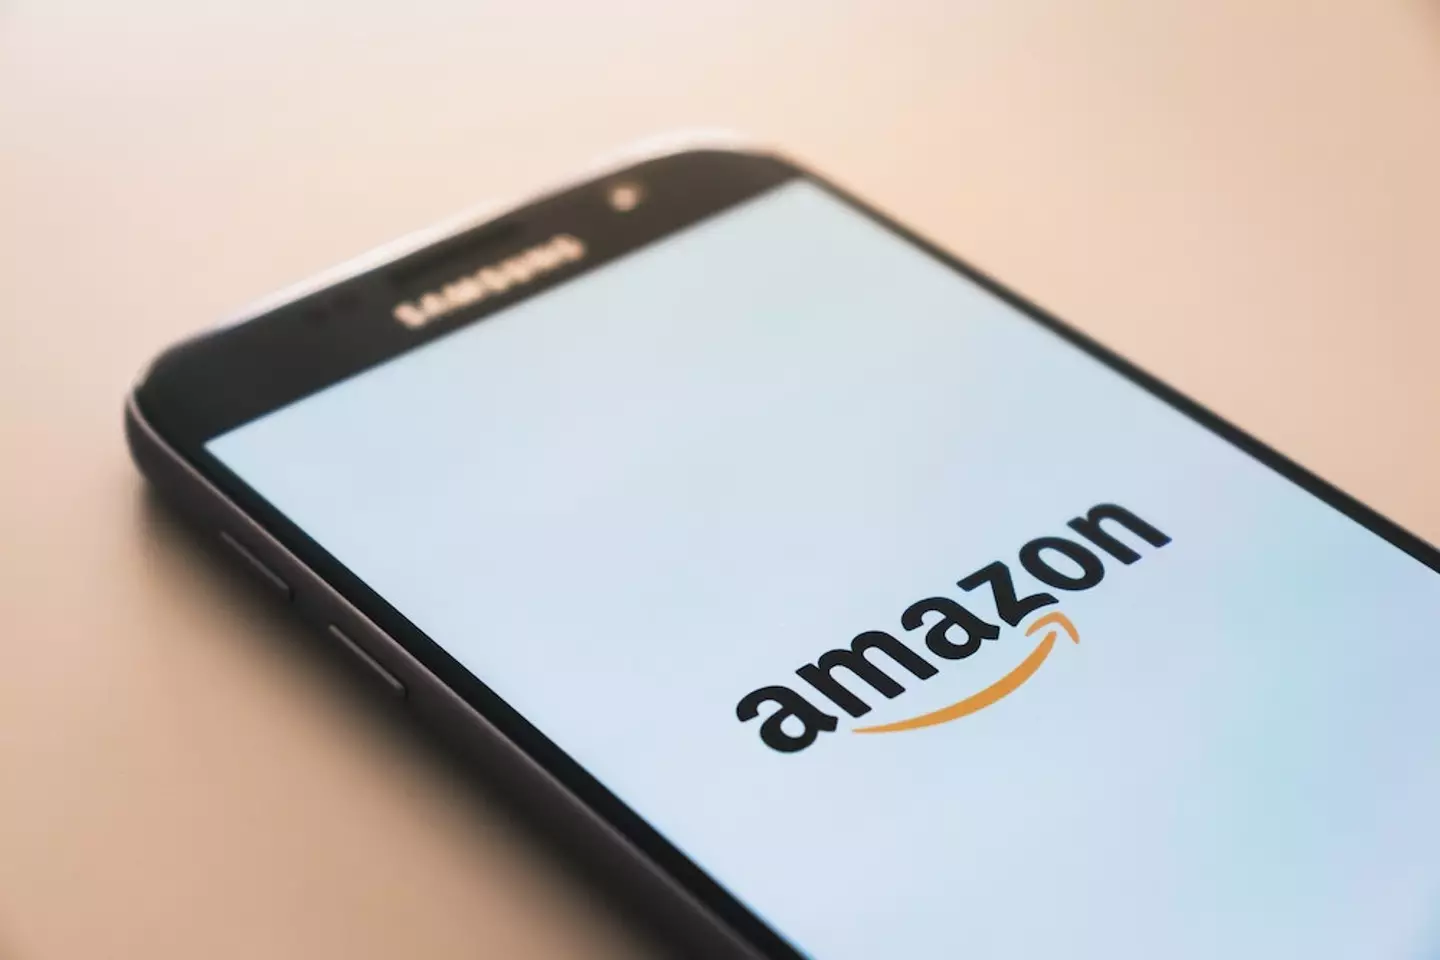 The cost of Amazon Prime is set to increase on 15 September.